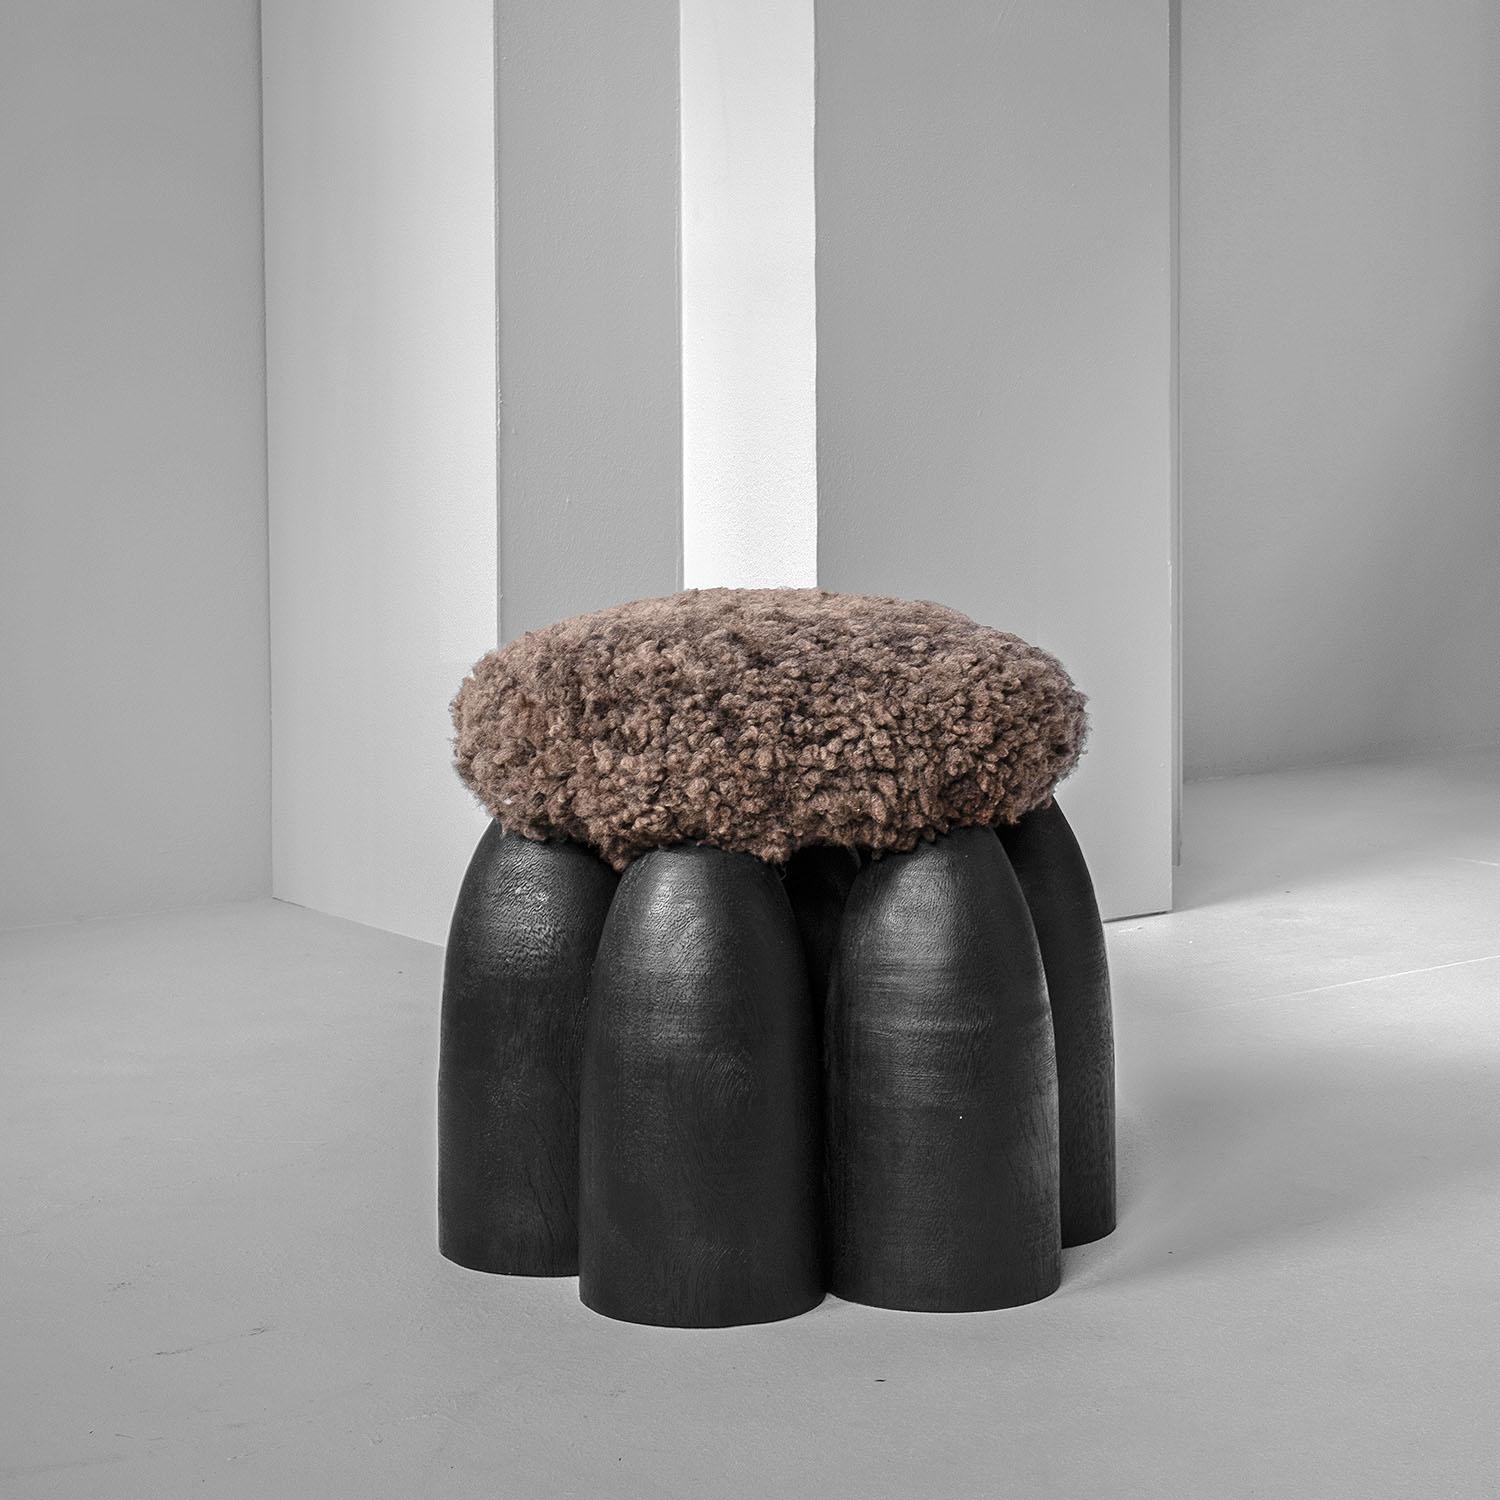 Contemporary Black Stool in Iroko Wood, Senufo by Arno Declercq

Material: Iroko wood and sheepskin by Carine Boxy
Dimensions: L 45 cm x W 45 cm x H 40 cm L / 17,7 ” x W 17,7 “ x H 15,7 “

Made by hand, in Belgium.

Arno Declercq
Belgian designer